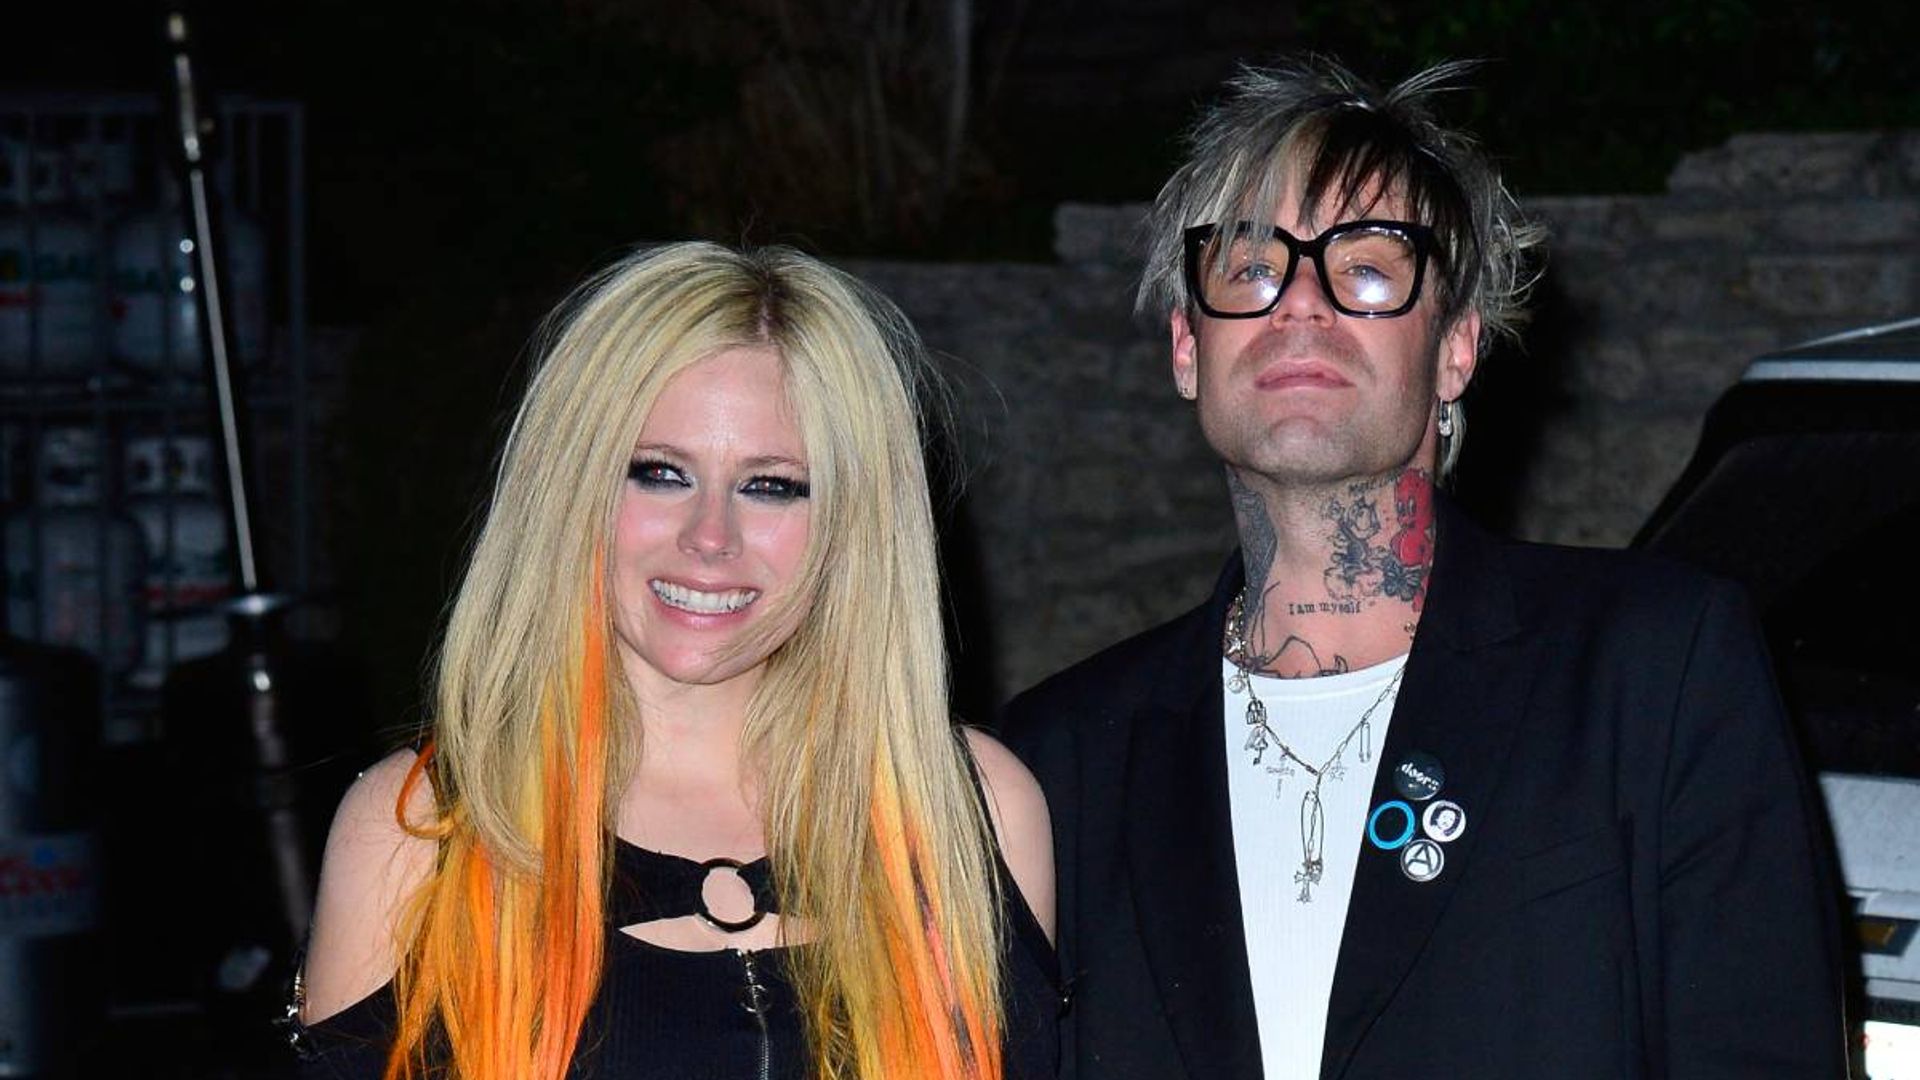 Avril Lavigne shares adorable videos of fiancé Mod Sun cheering her on as she performs